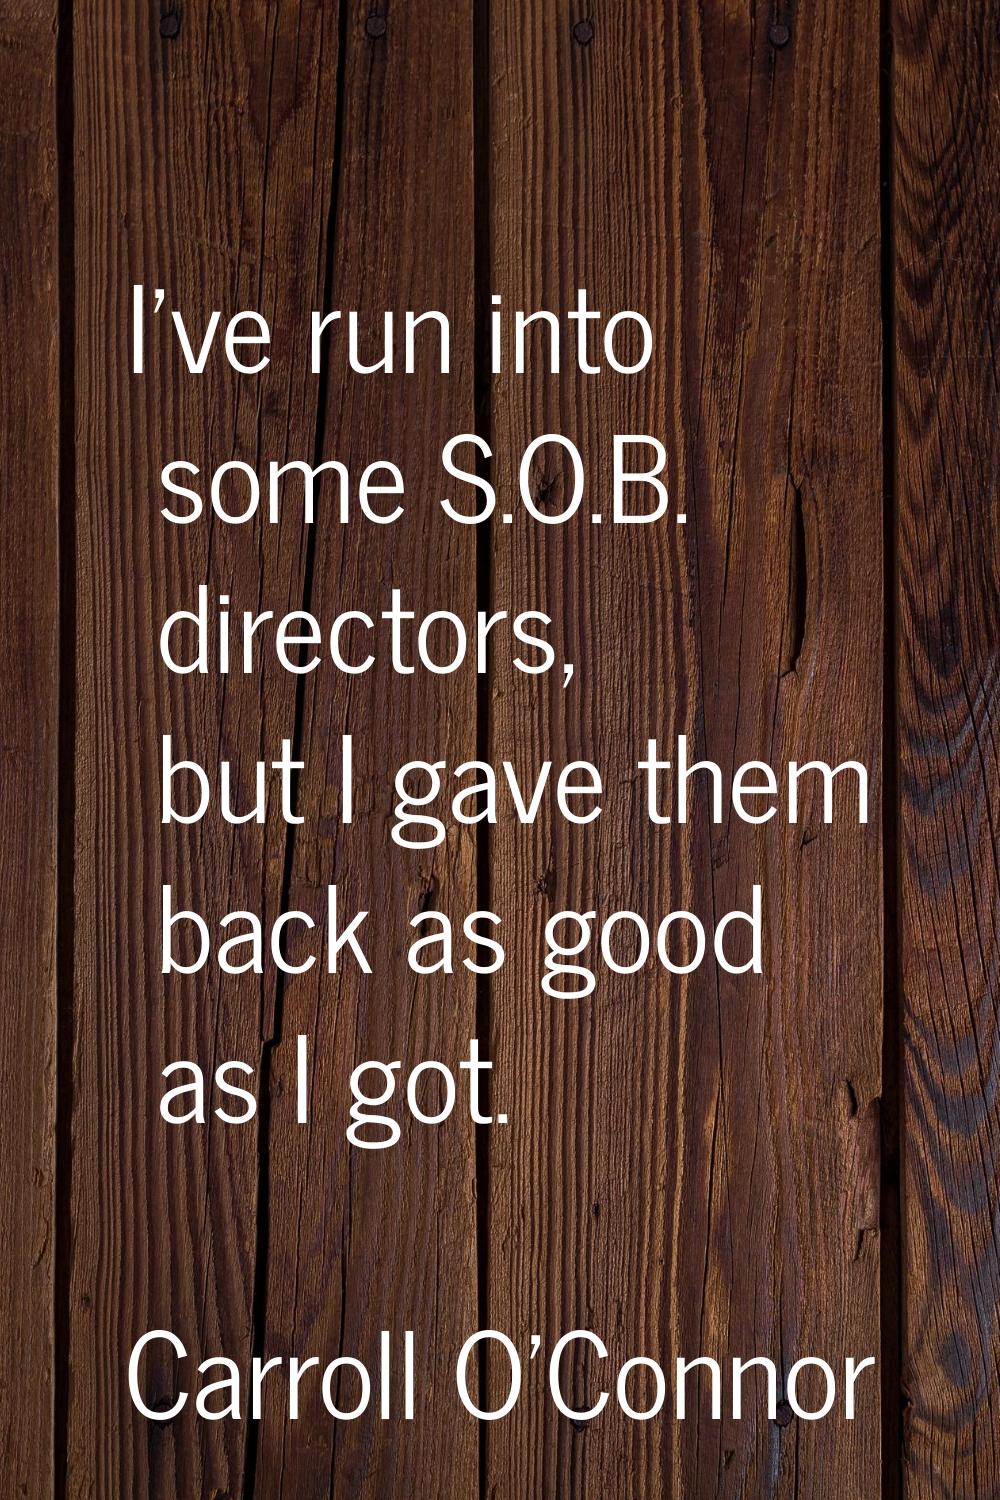 I've run into some S.O.B. directors, but I gave them back as good as I got.